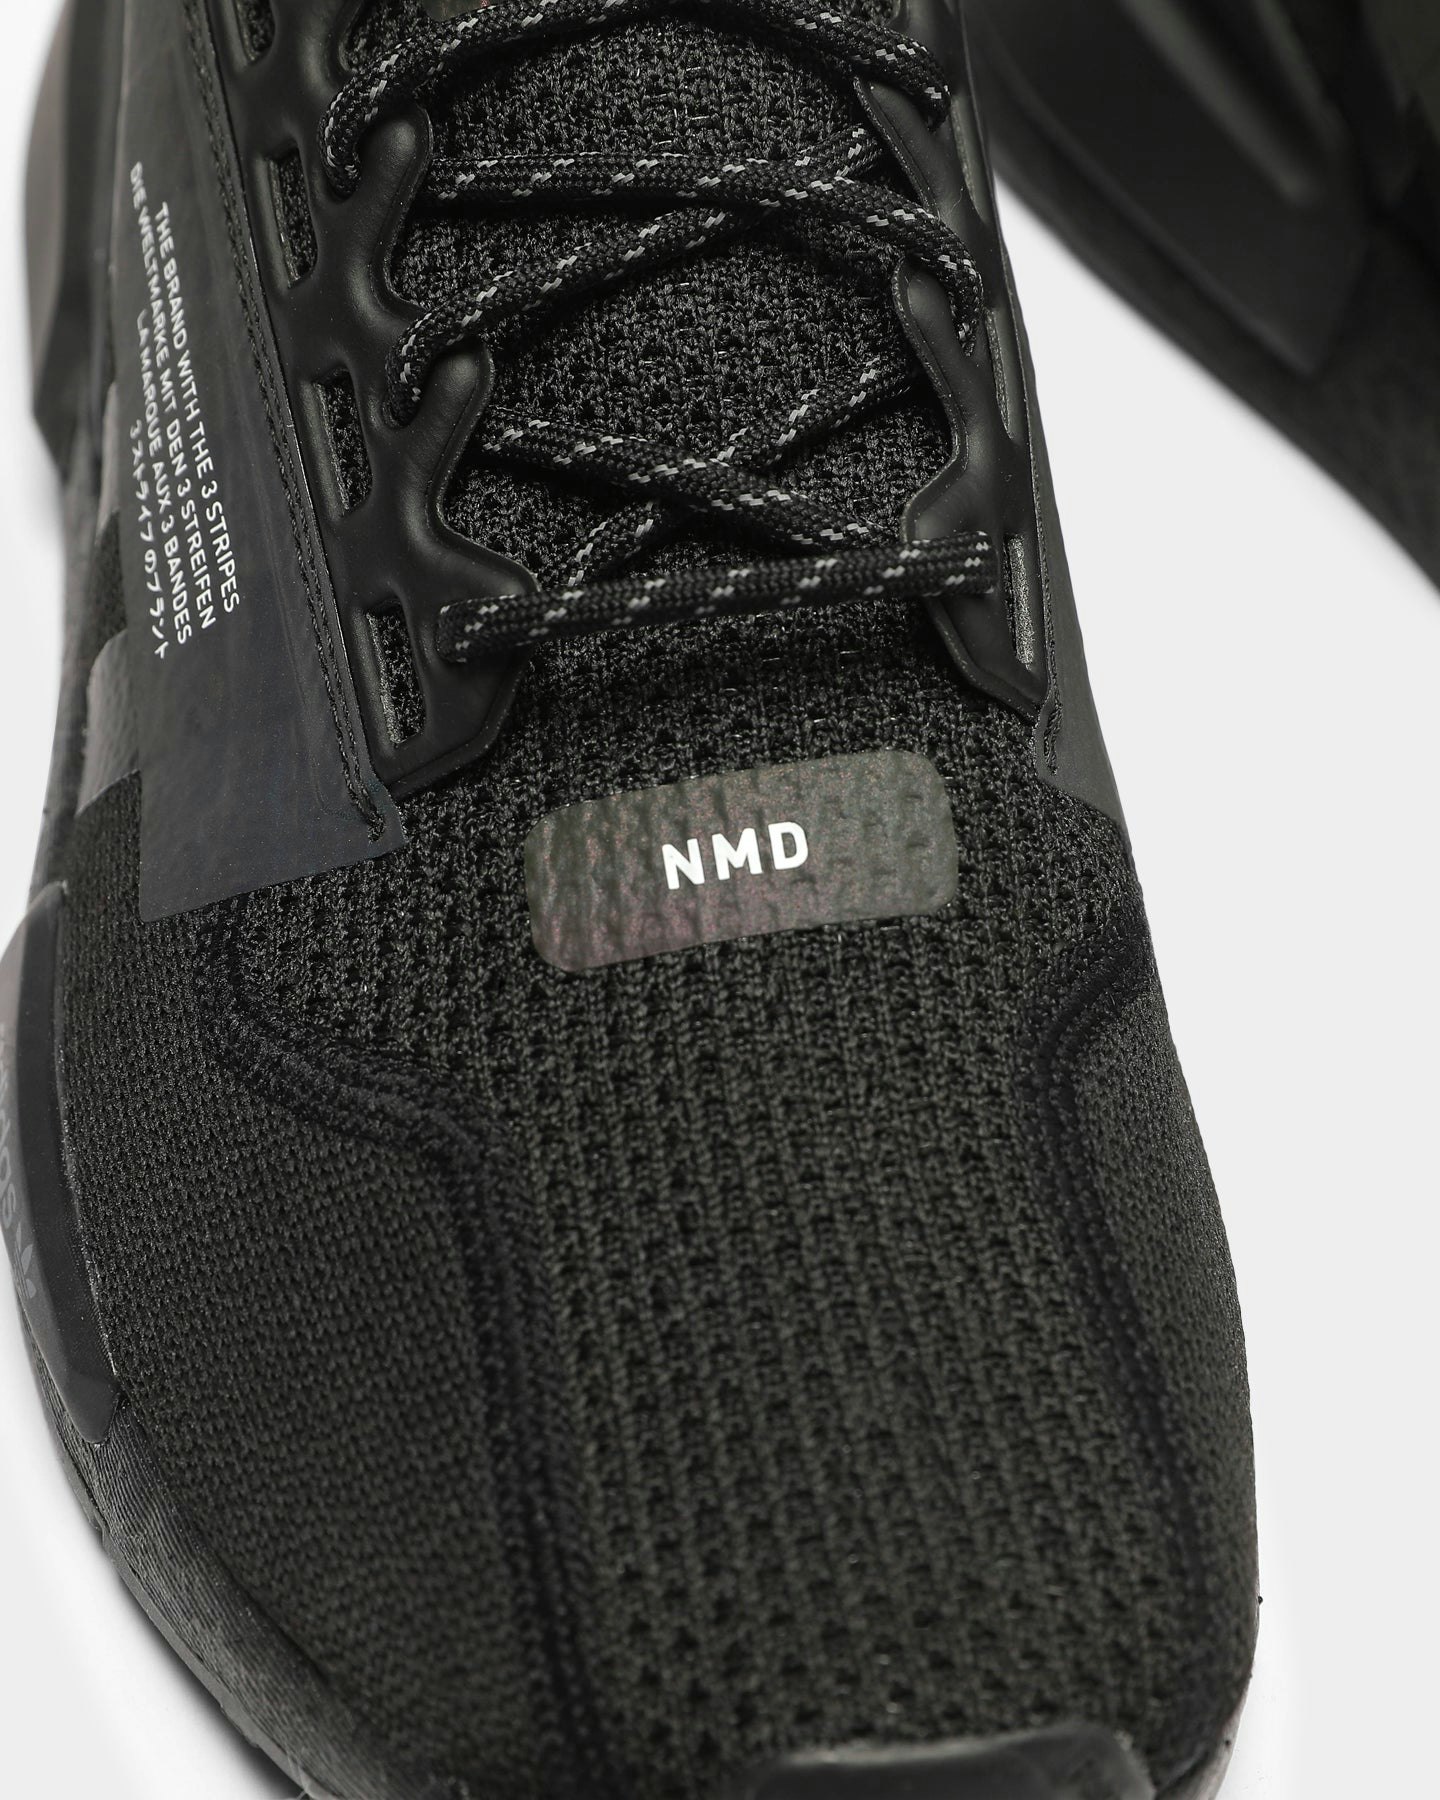 ADIDAS NMD R1 TRI COLOR Clothing Shoes in Downey CA